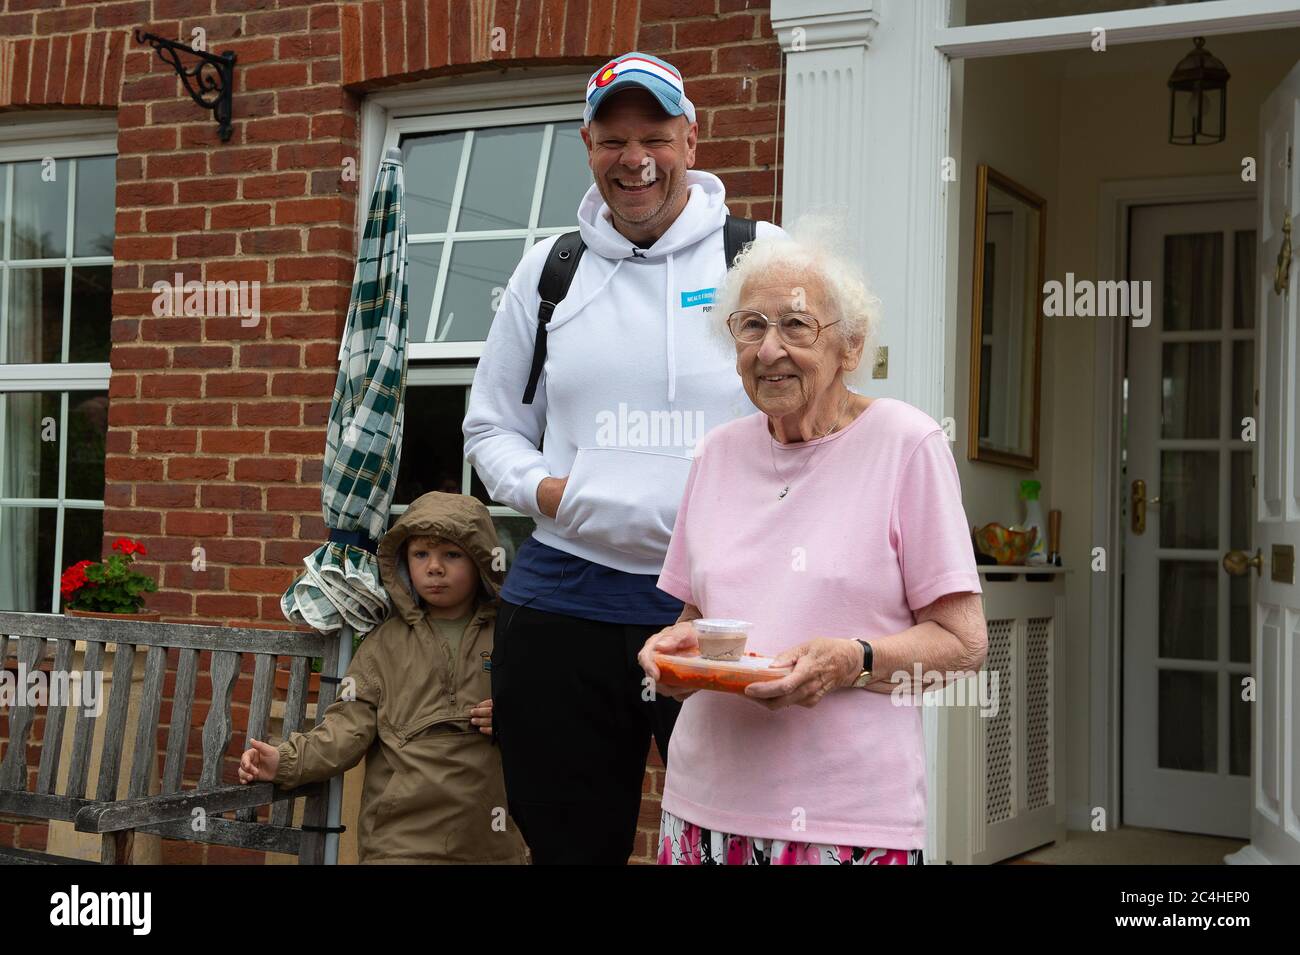 Marlow, Buckinghamshire, UK. 27th June, 2020. Celebrity Chef Tom Kerridge, his furloughed chefs and volunteers from Meals from Marlow have been cooking and delivering free meals to NHS key workers, people self isolating and those in need during the Coronavirus lockdown. Today 75,000th meal was delivered to Joyce aged 90 who lives in Marlow by Tom and his son Acey aged 4 whilst volunteers cheered. Credit: Maureen McLean/Alamy Live News Stock Photo